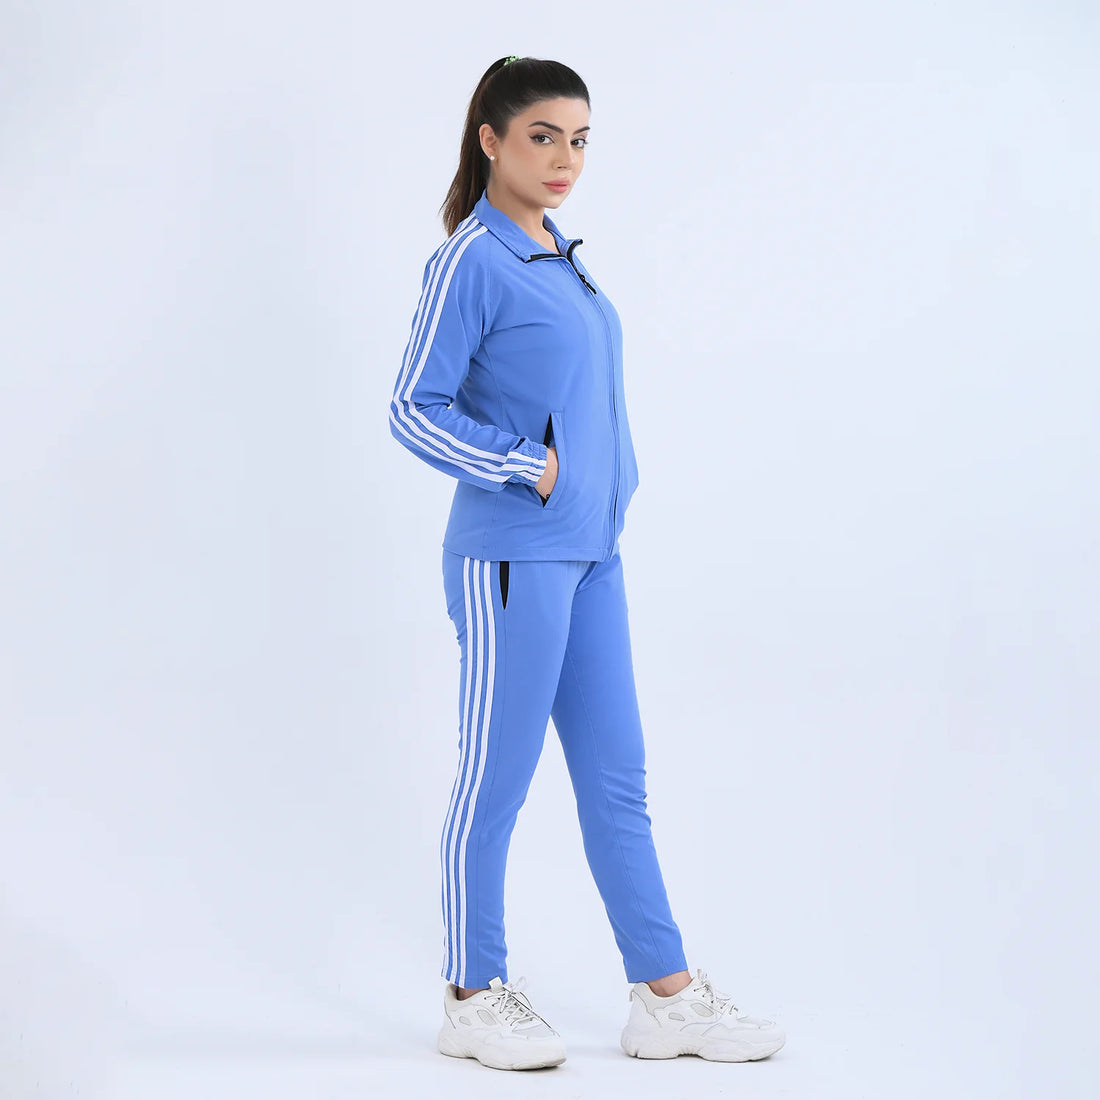 Striped Ladies Fitted Jogging Suit